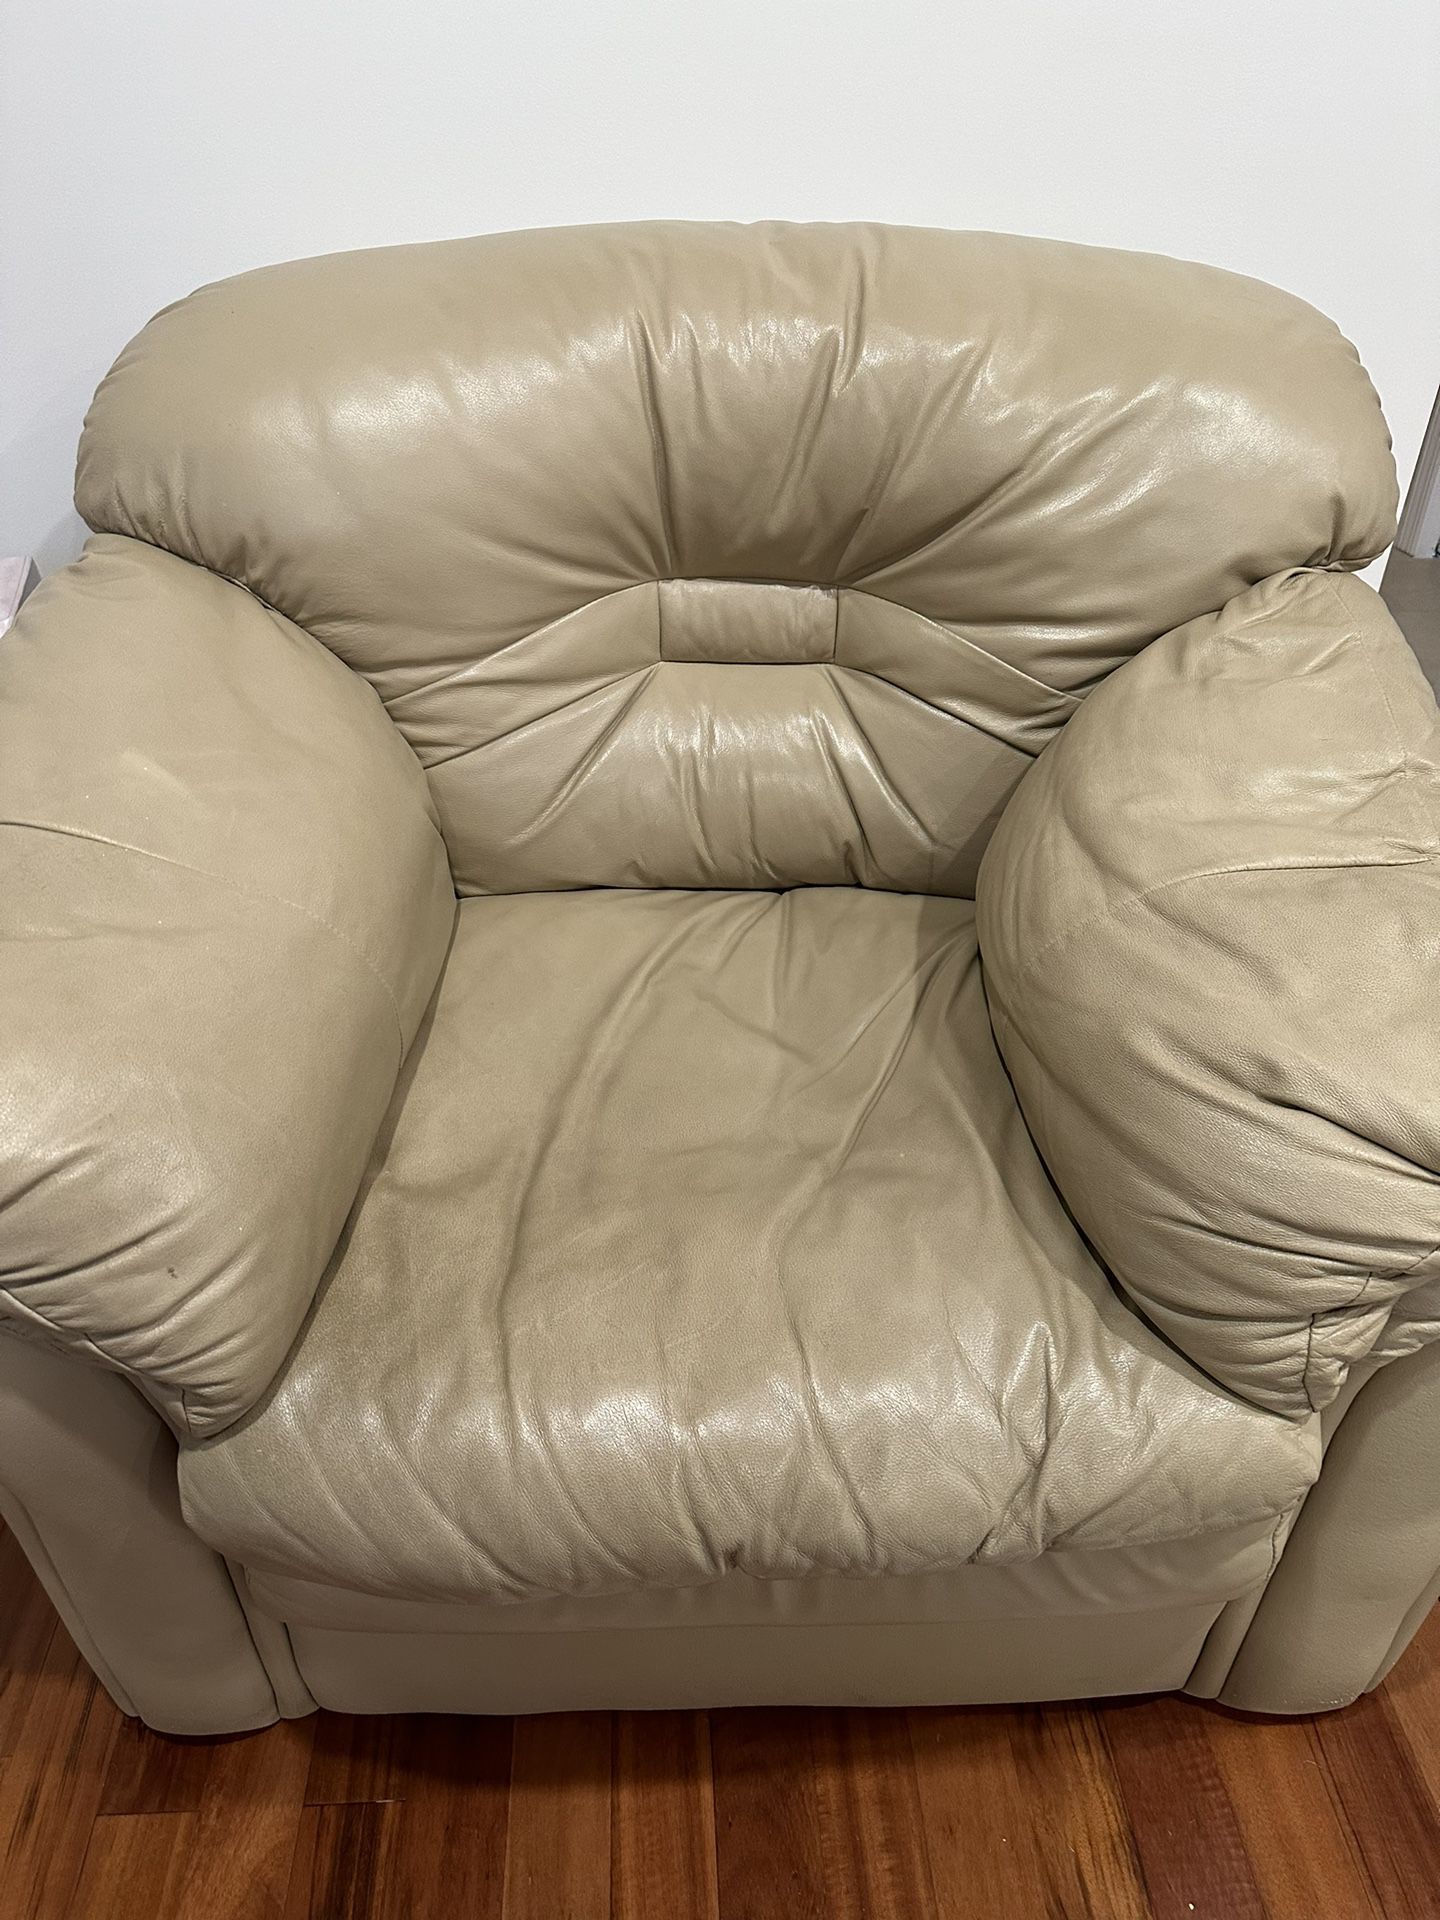 Single Leather Couch Chair 